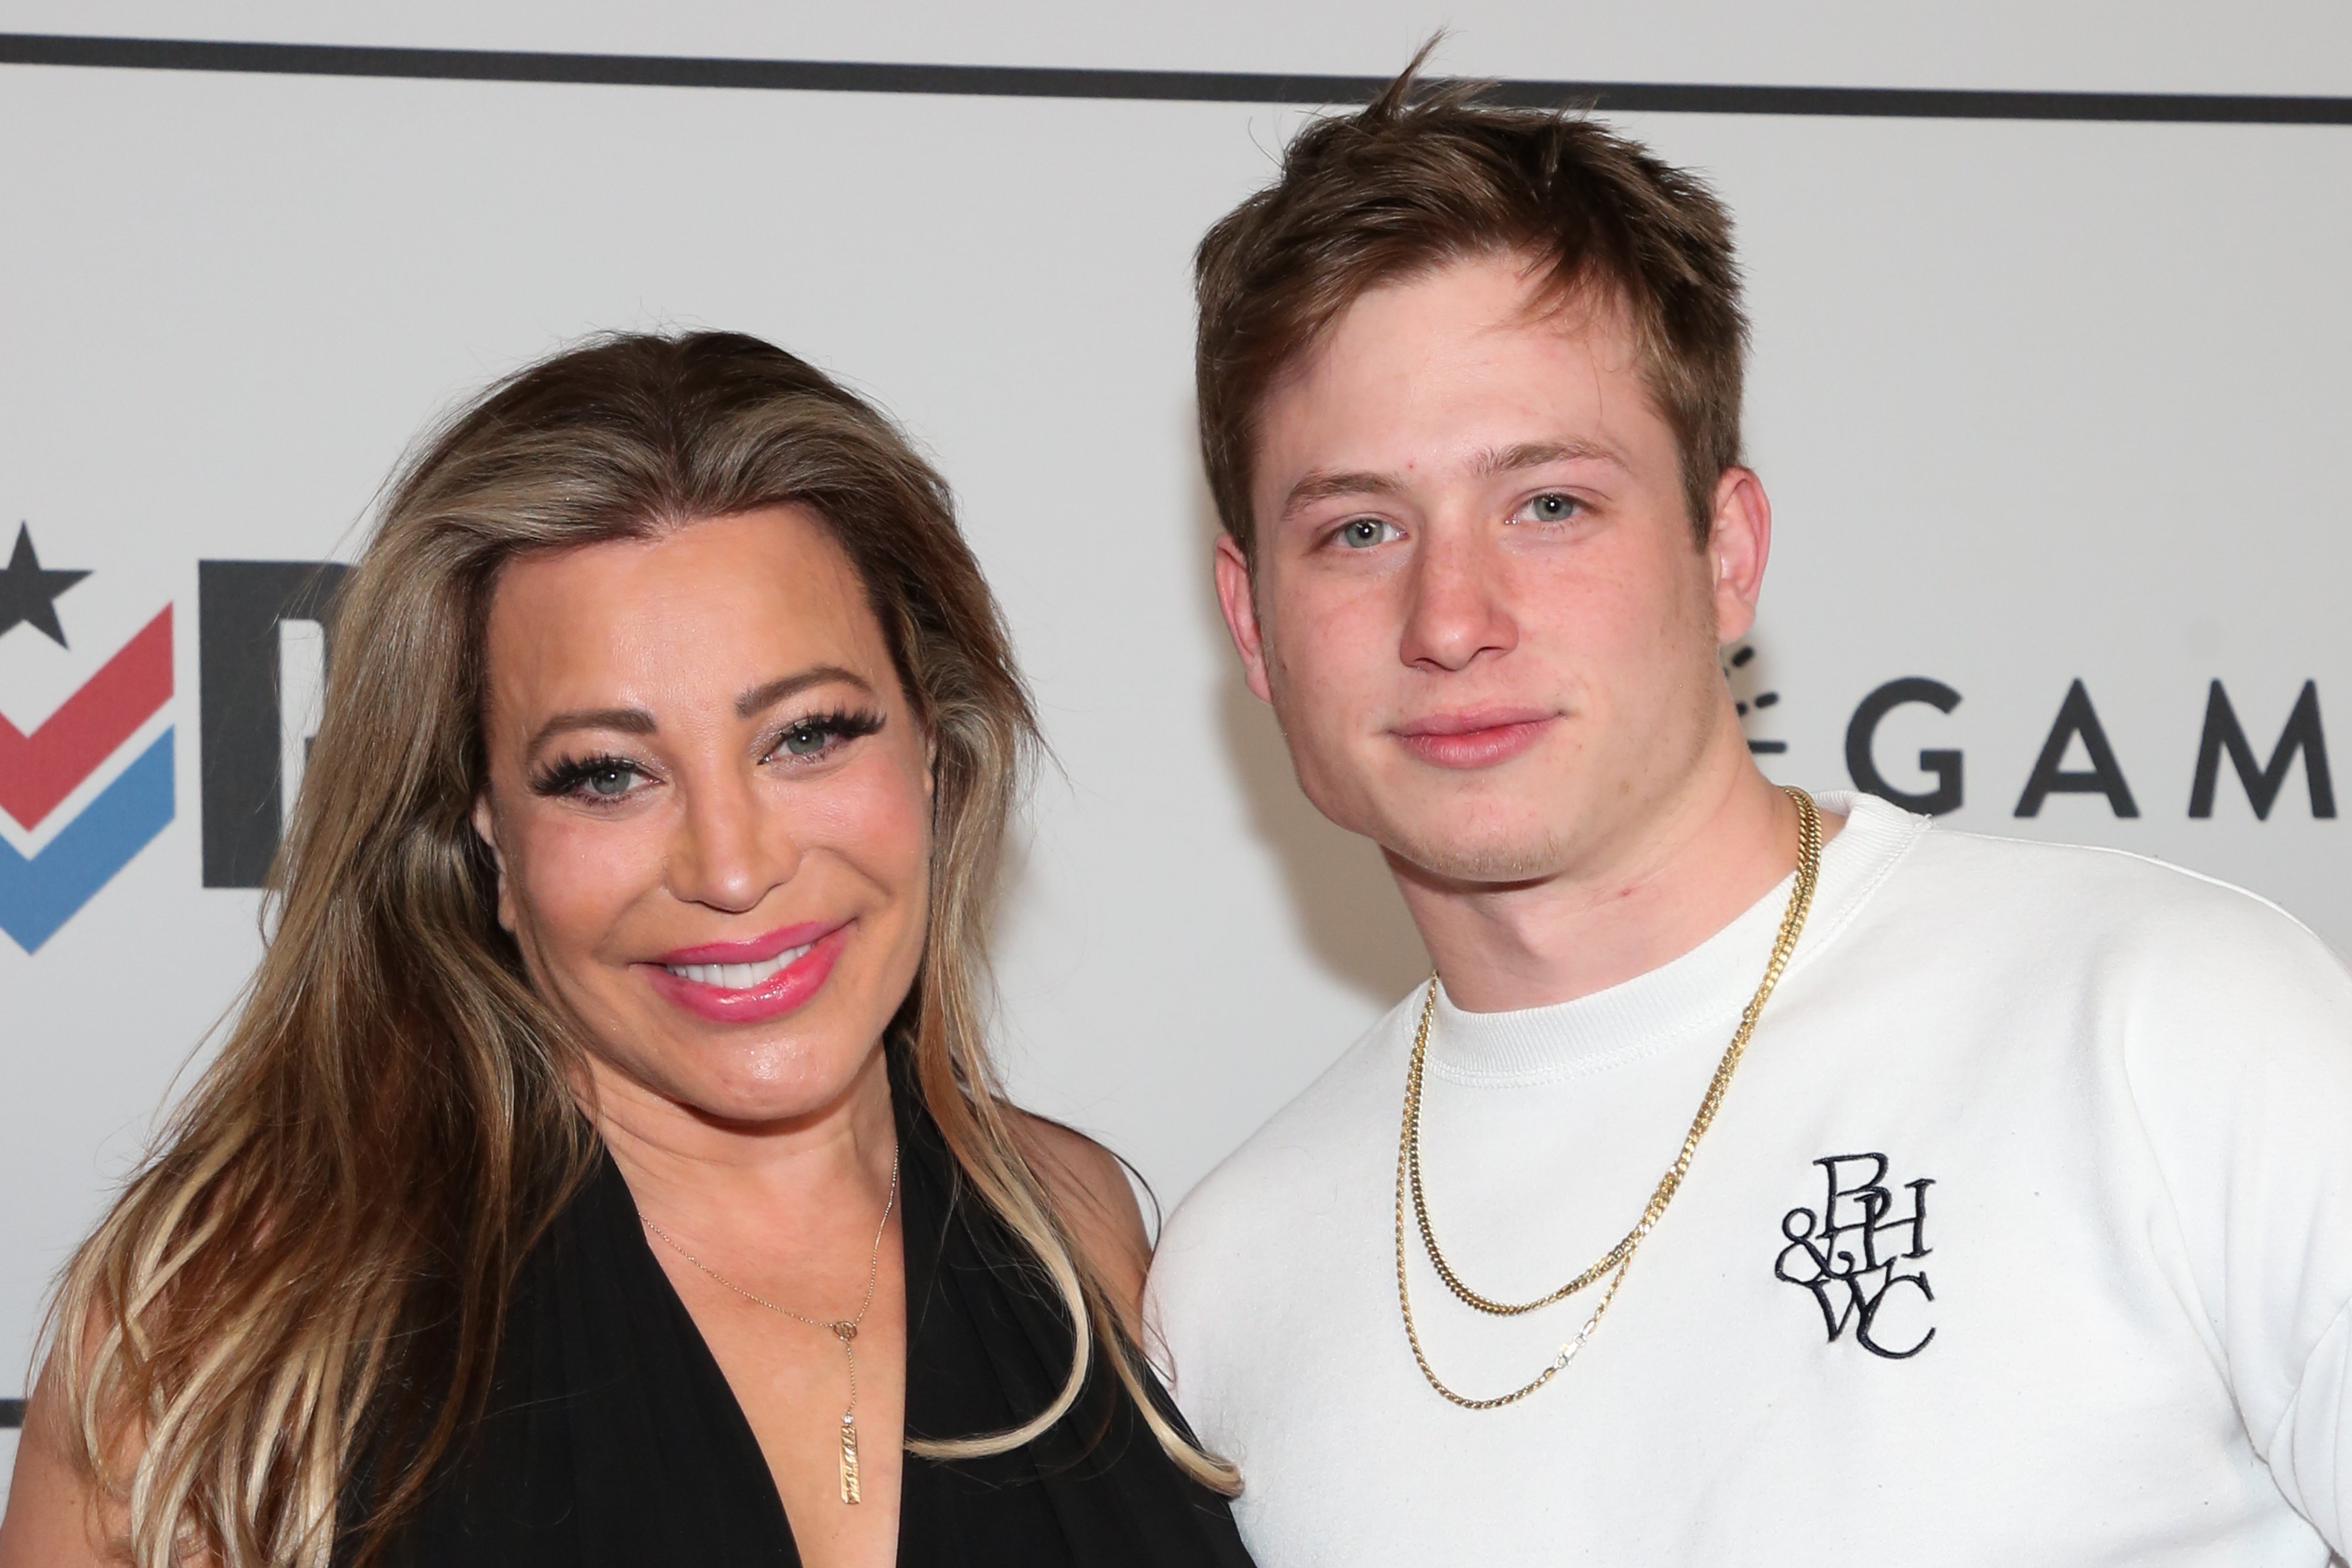 Taylor Dayne and Levi Dayne attend the Big Game Kick-Off at Academy LA on February 09, 2022, in Los Angeles, California. | Source: Getty Images